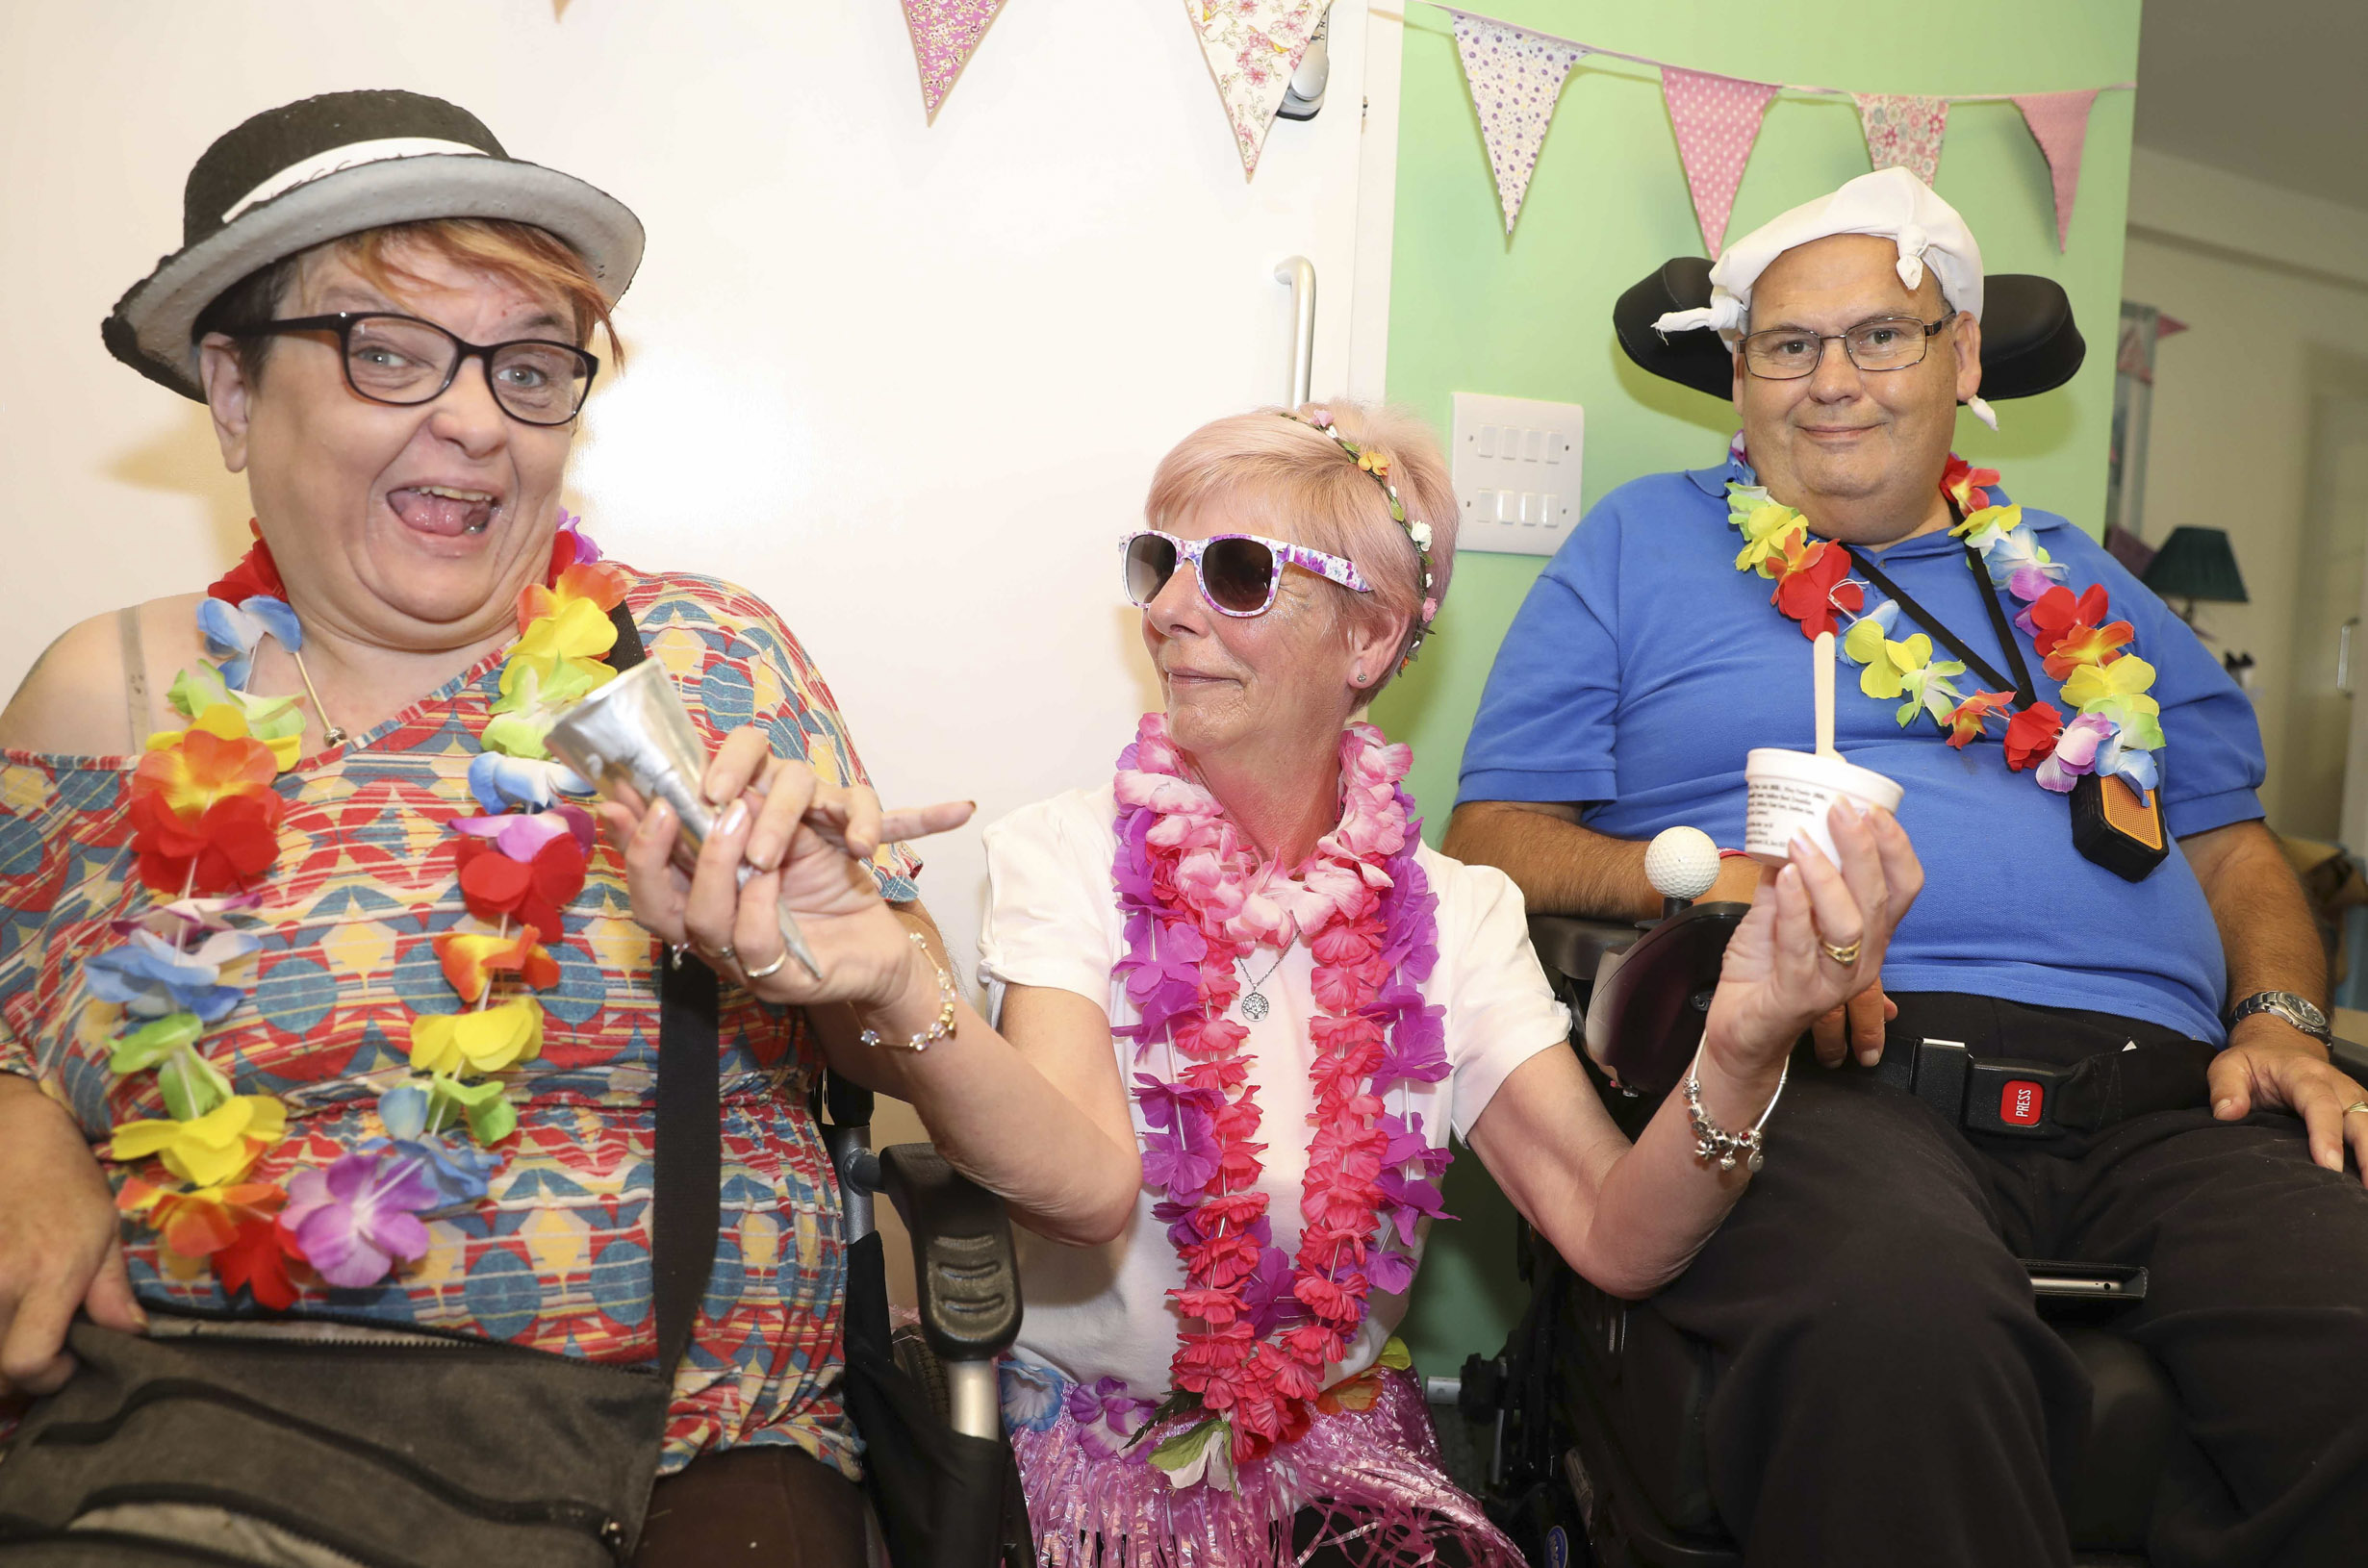 Life’s a beach for creative care home residents